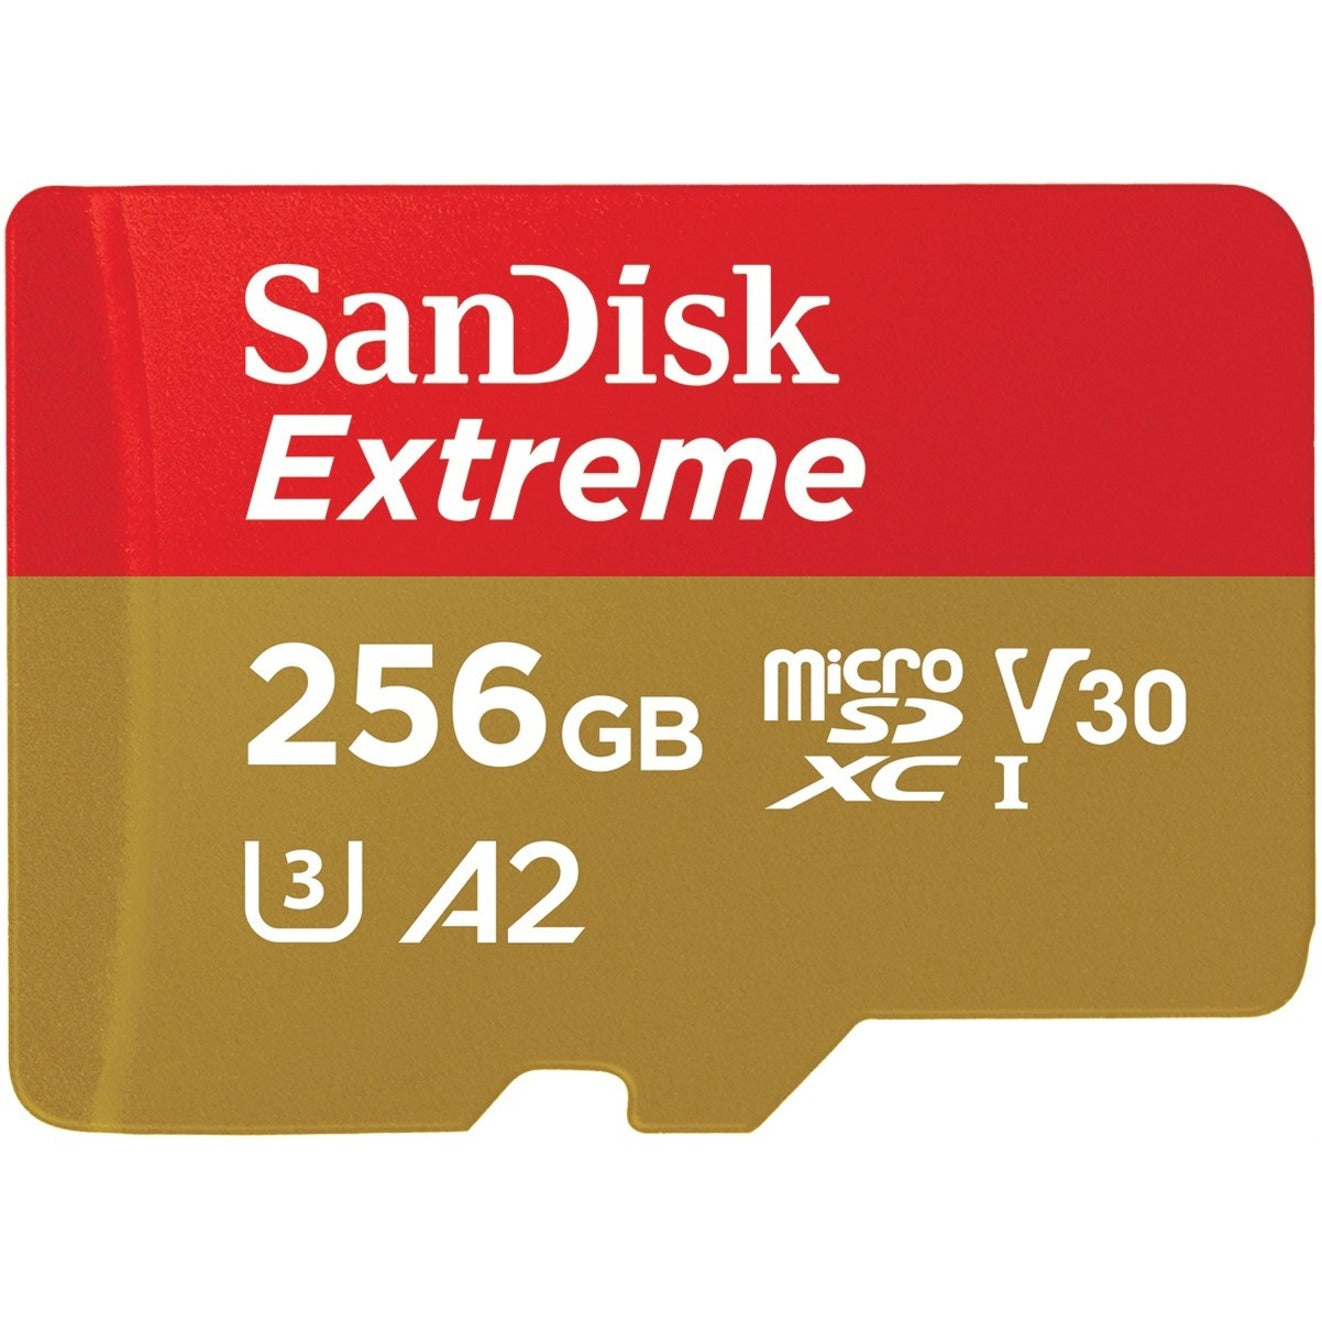 SanDisk Extreme 256GB UHS-I microSD Card - High-Speed Storage Solution [Discontinued]